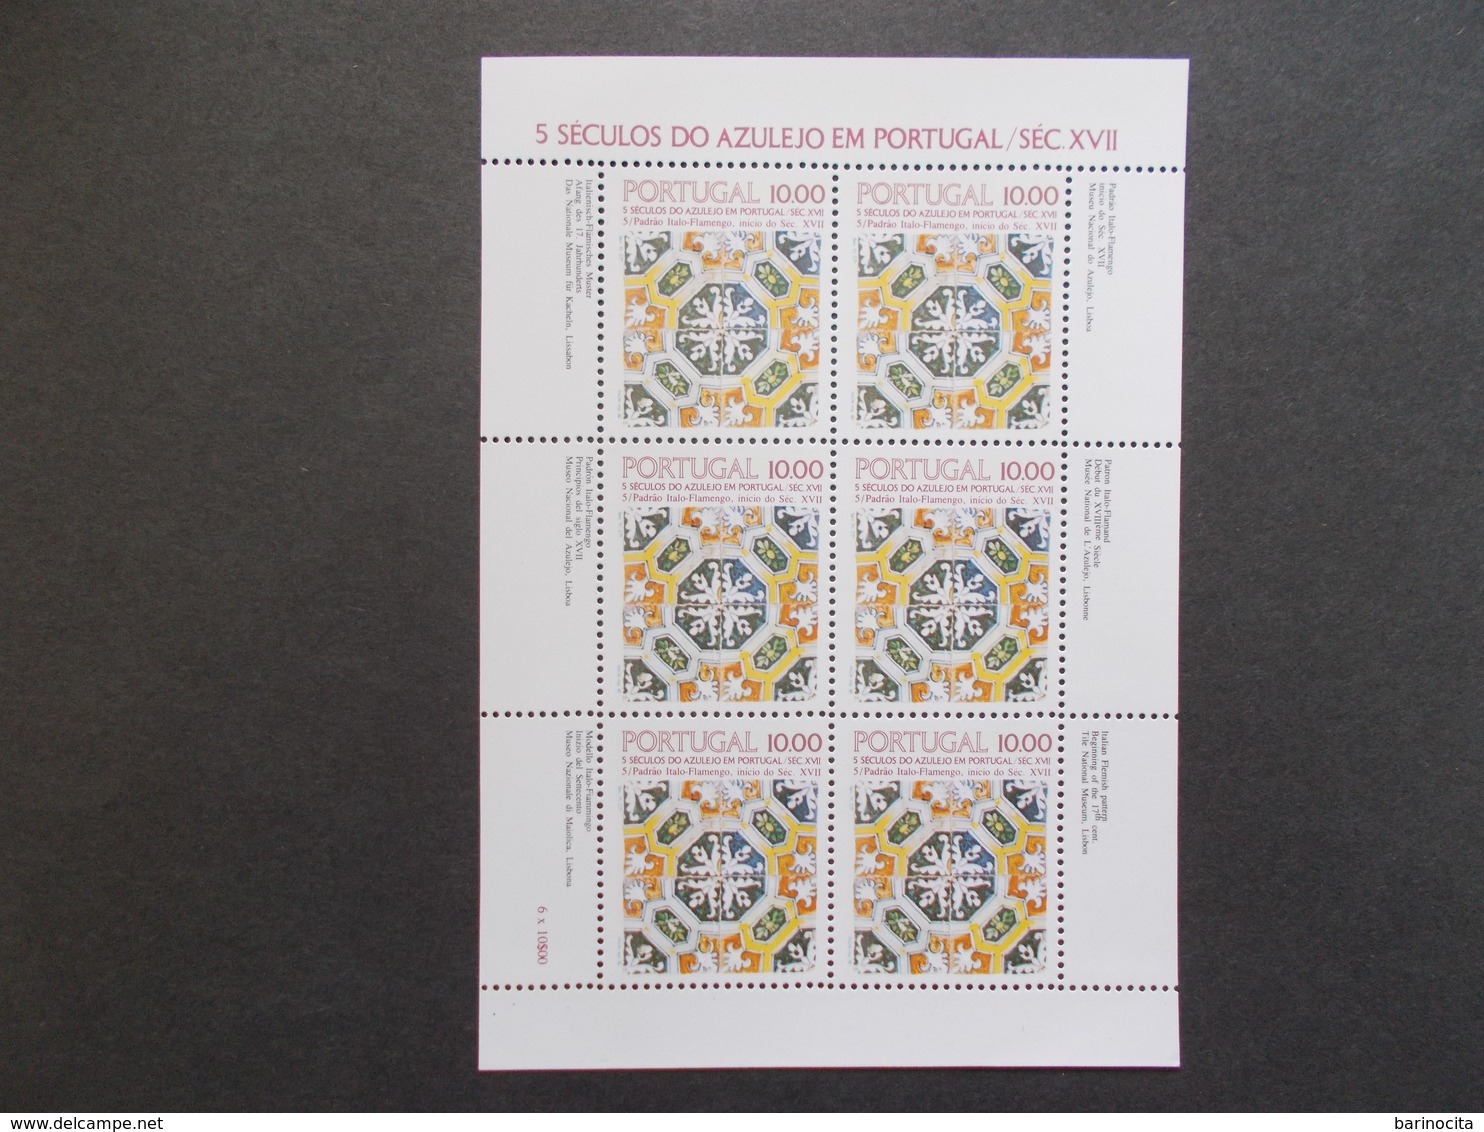 PORTUGAL   -  FEUILLES  Complete  Di Timbres   N° 1536 A   Année 1982   Neuf XX   ( Voir Photo )  49 - Full Sheets & Multiples